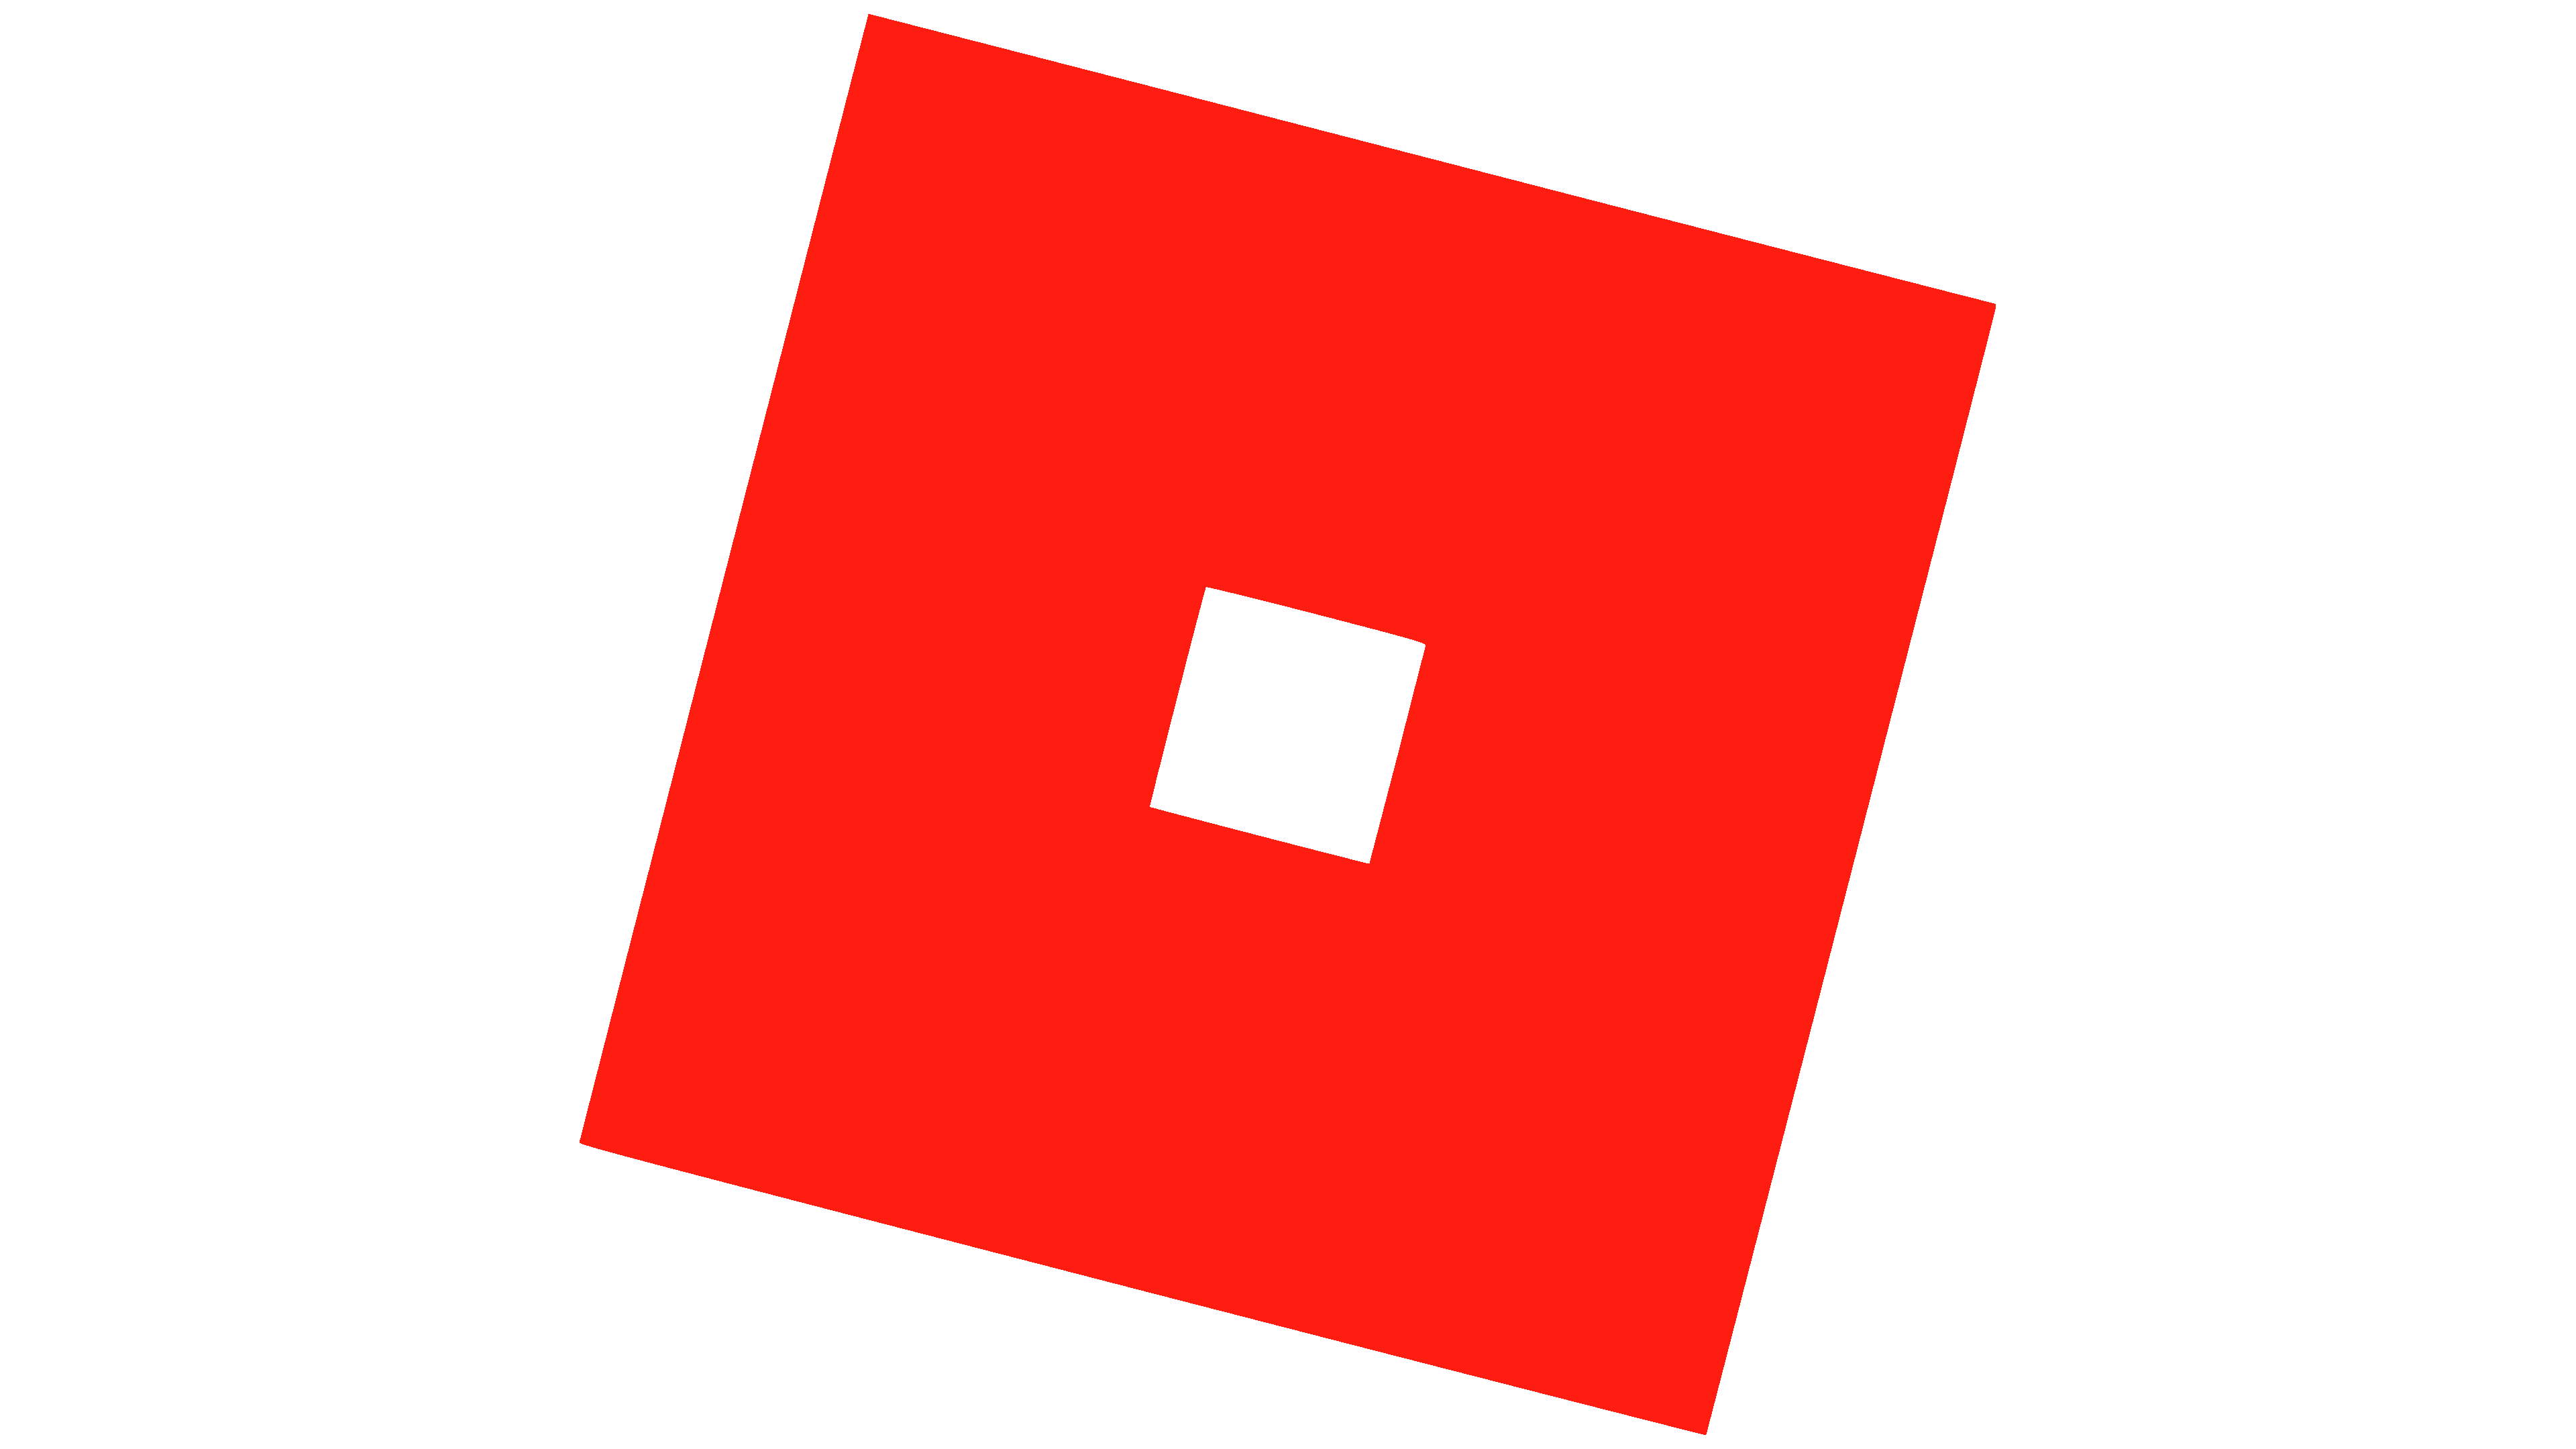 why did roblox just get rid of its iconic red color from the logo wordmark  and replace it with a souless black color :/ : r/roblox